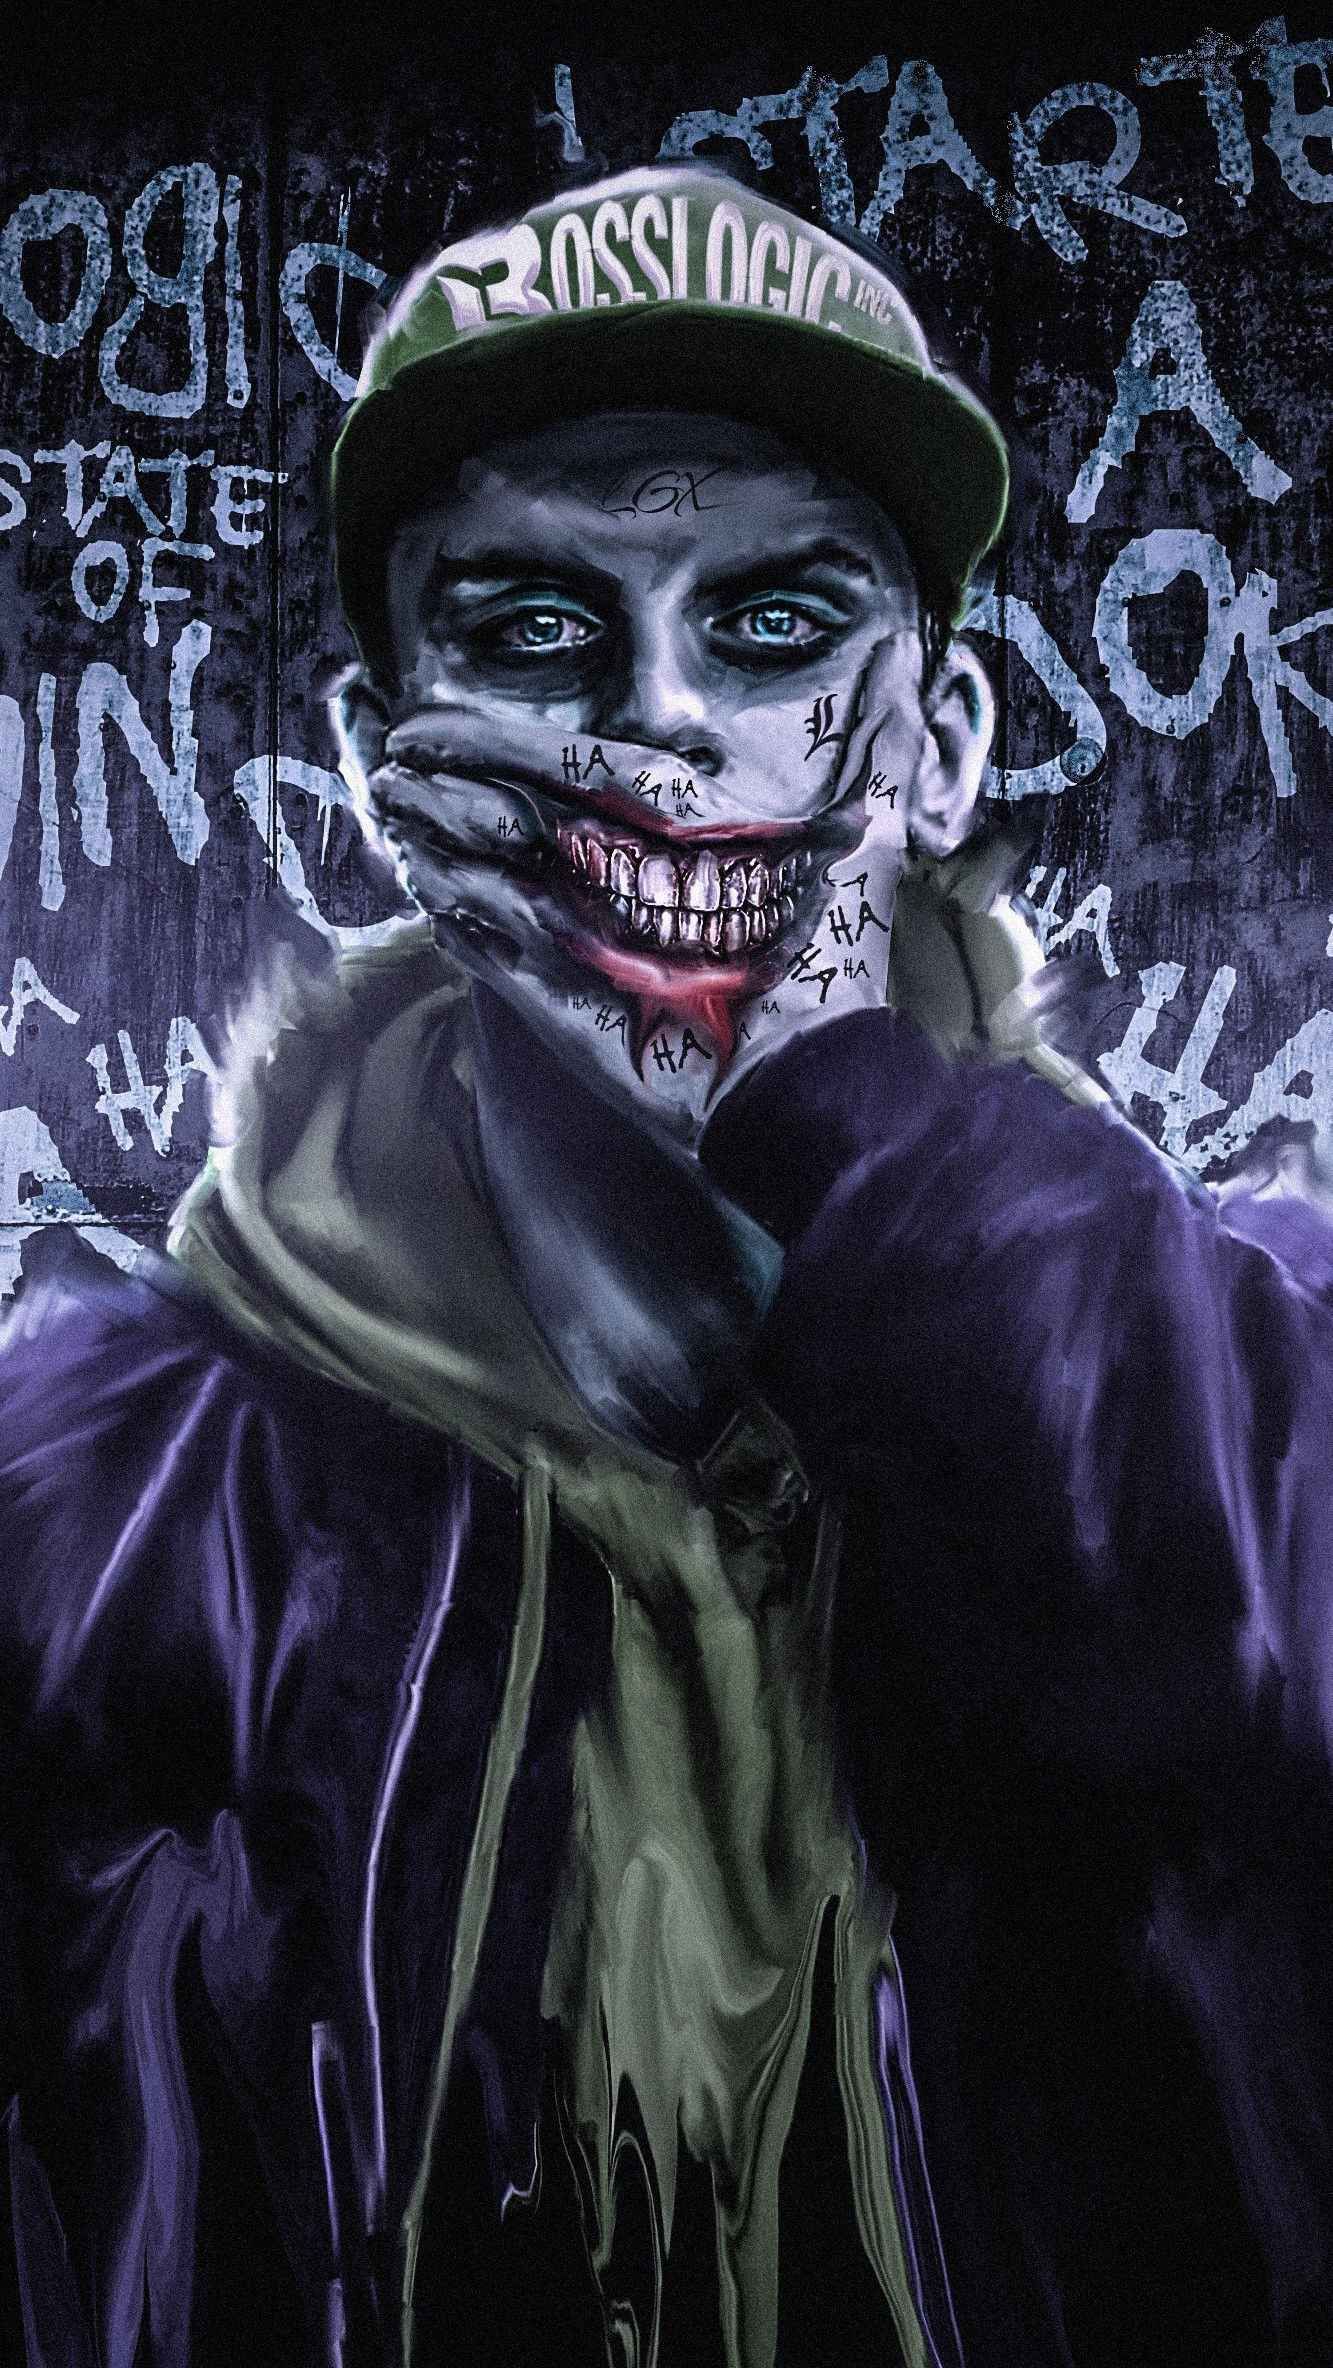 iPhone Wallpaper for iPhone XS, iPhone XR and iPhone X. Joker smile, Joker wallpaper, Joker iphone wallpaper